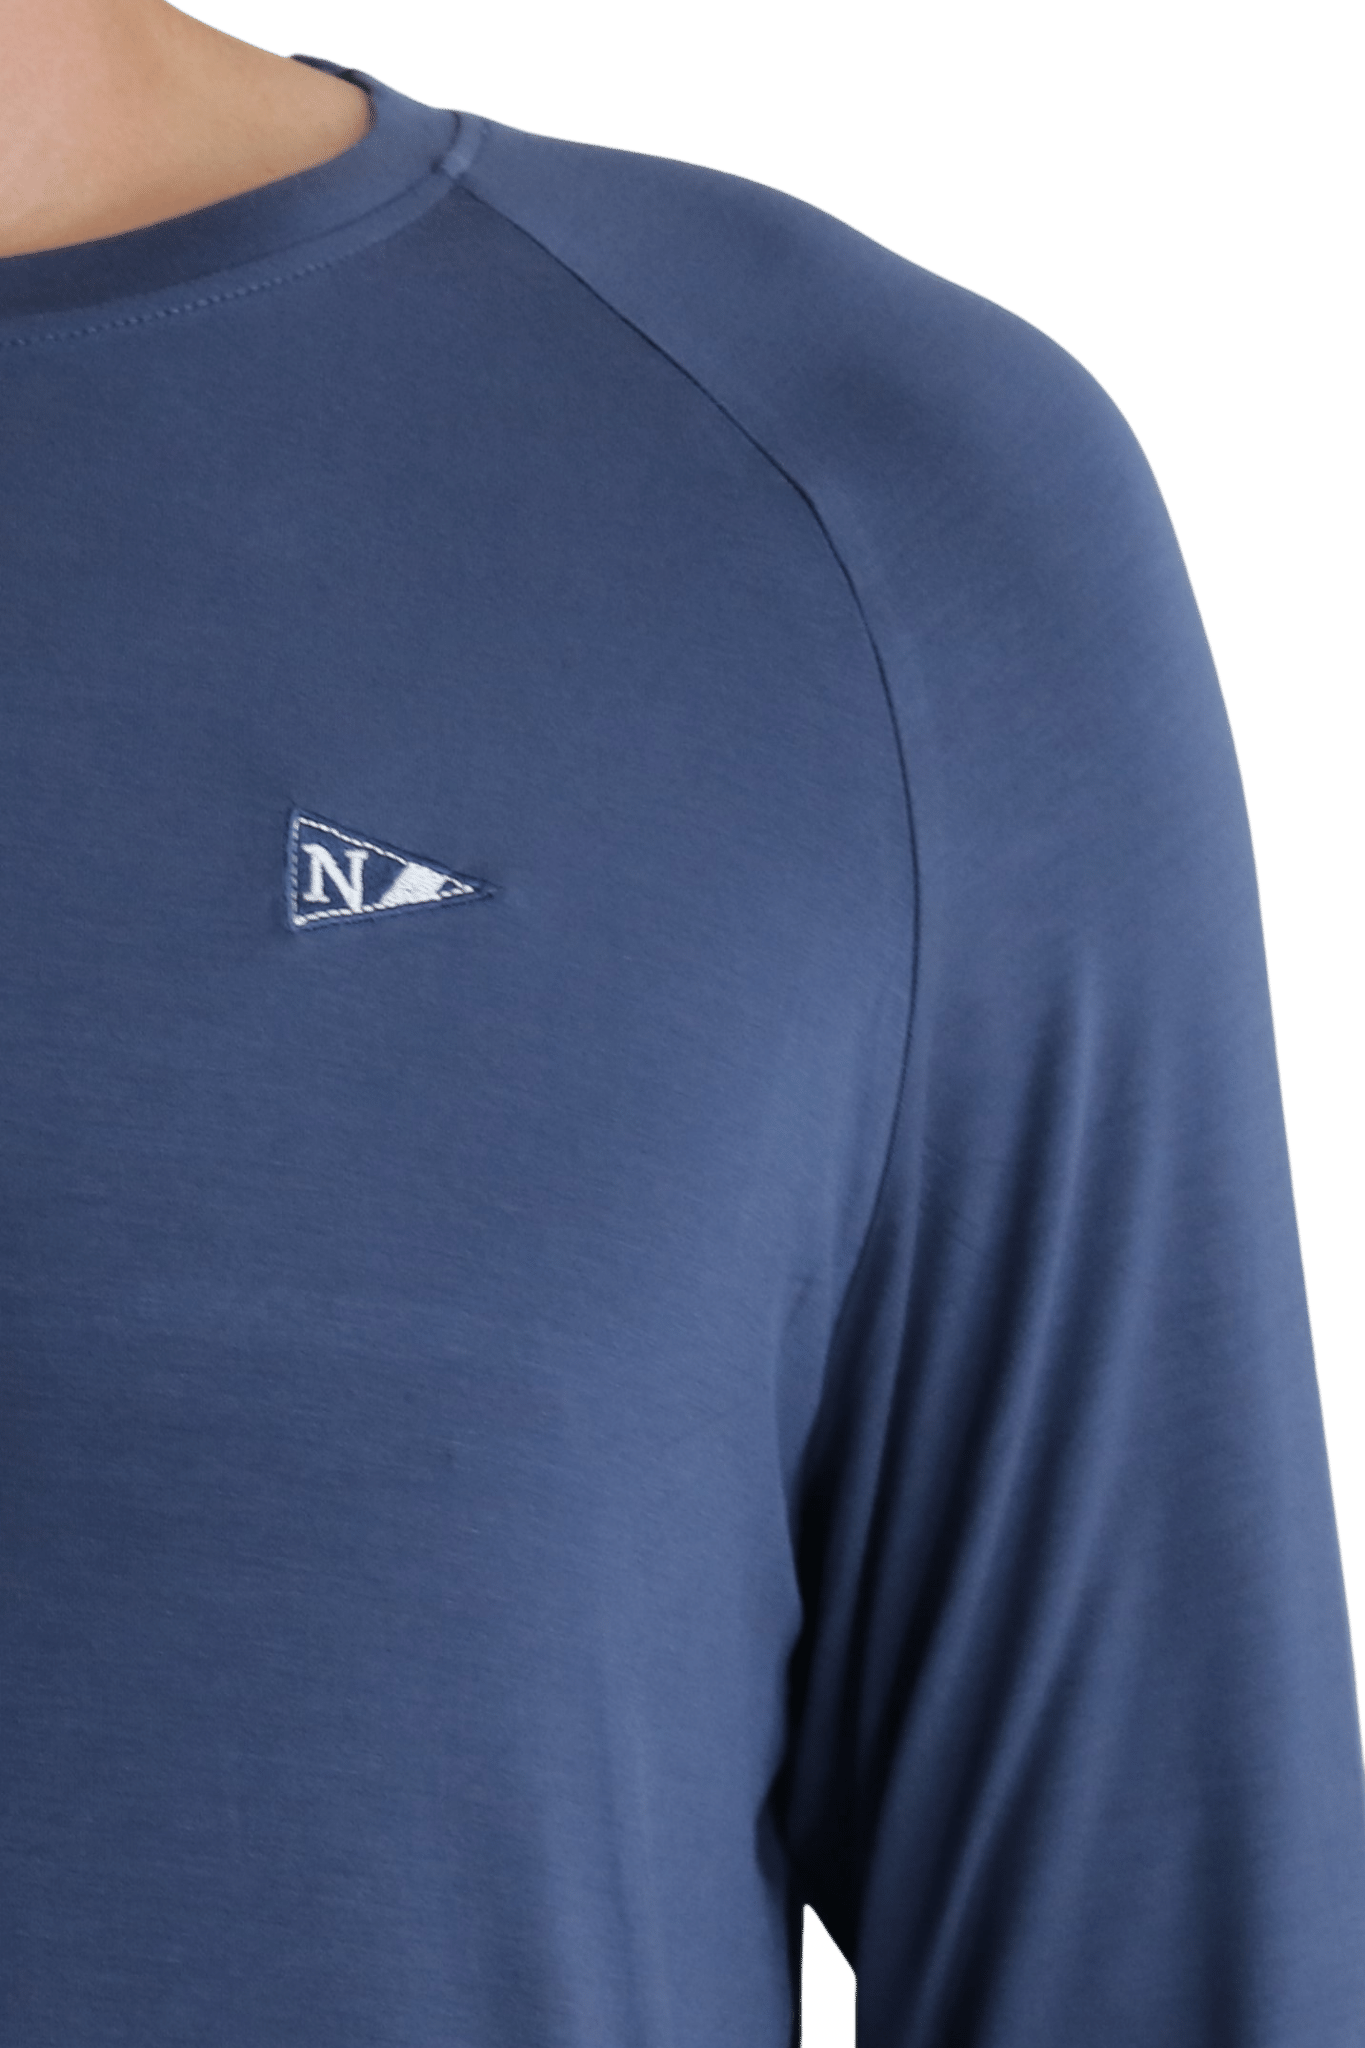 Front logo of the navy icon long sleeve bamboo shirt with 35+ UPF sun protection.